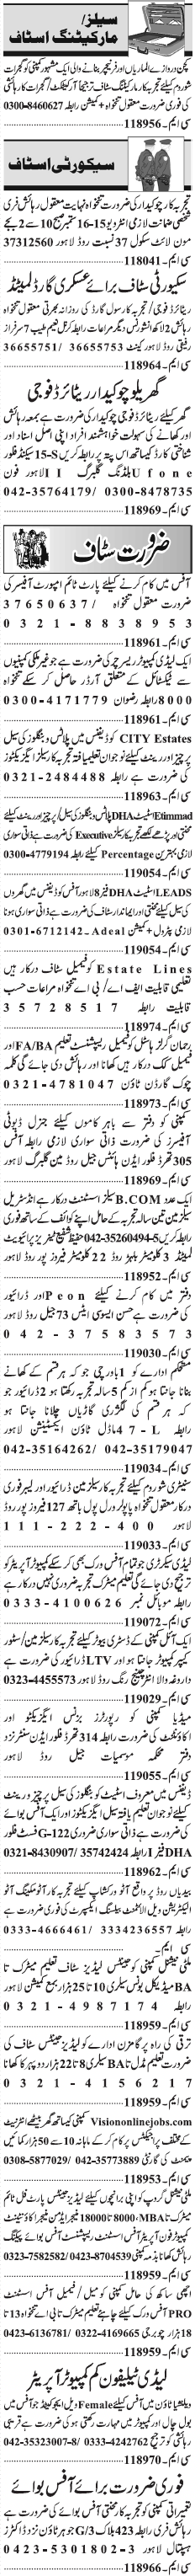 Misc. Jobs in Lahore Classified -5